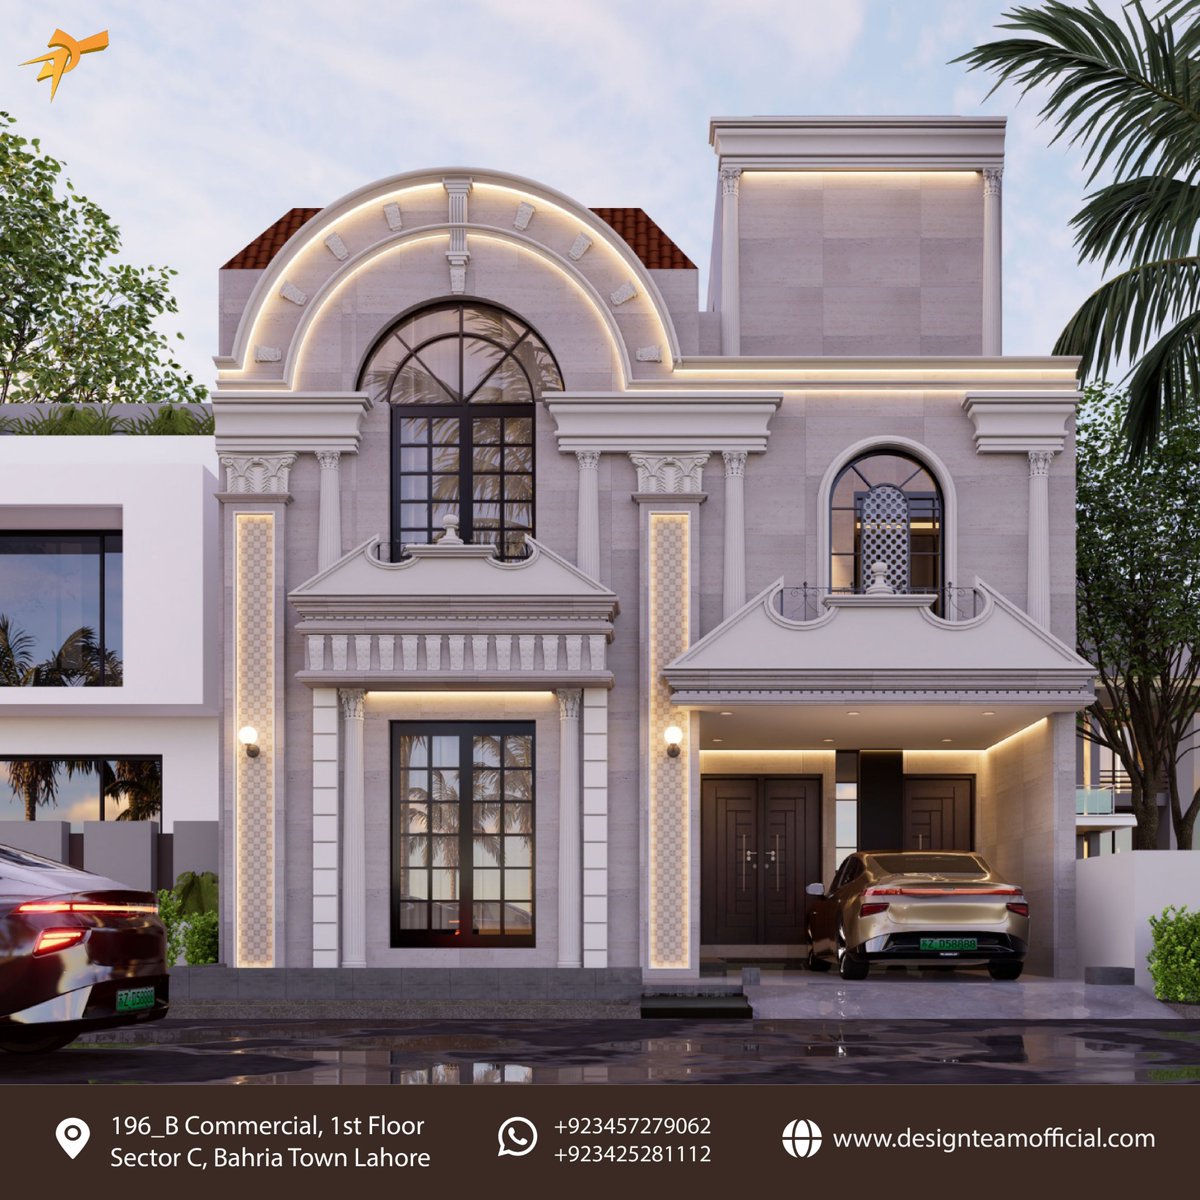 Stunning 5 Marla Classical House Elevation
#homedecor #design #elevation #house #architecture #architects #homeelevation #facade